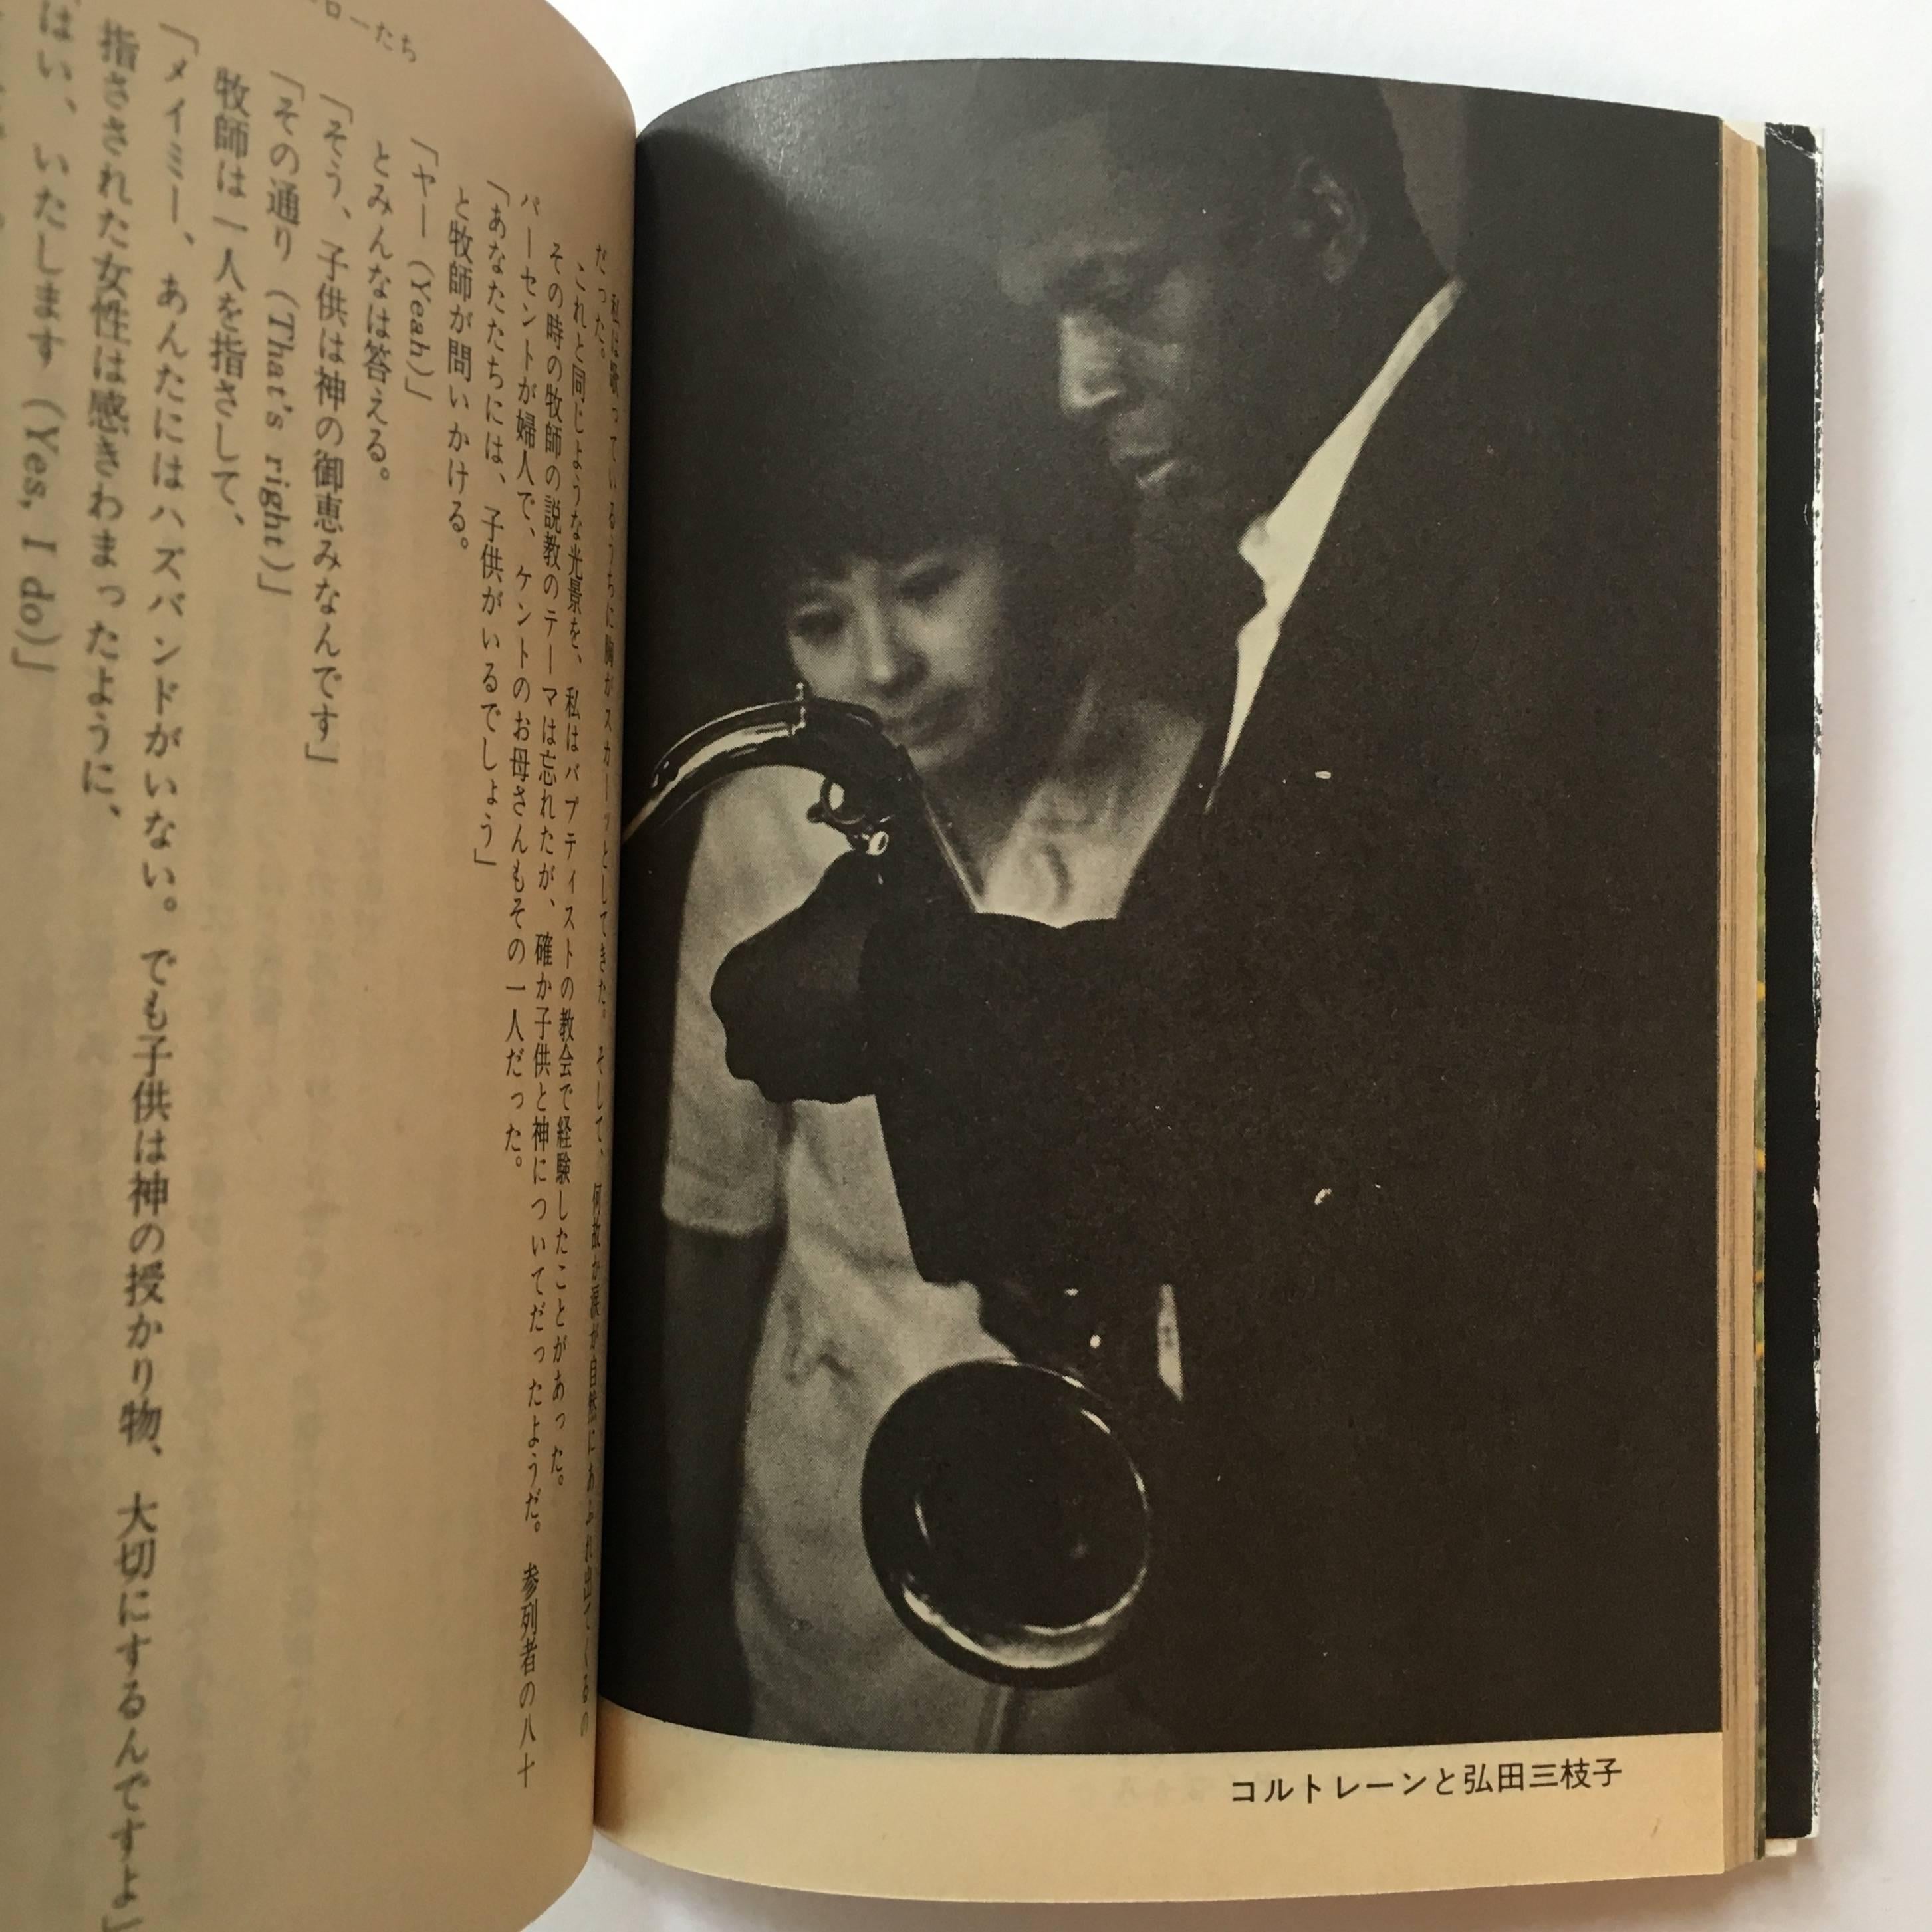 First edition paperback, published by Bunko, Japan, 1979.

‘Black is Beautiful’ was a cultural movement that started in the 1960s, that evolved to dispel internalised racism, and the idea that to be black was to be ugly, or less desirable than